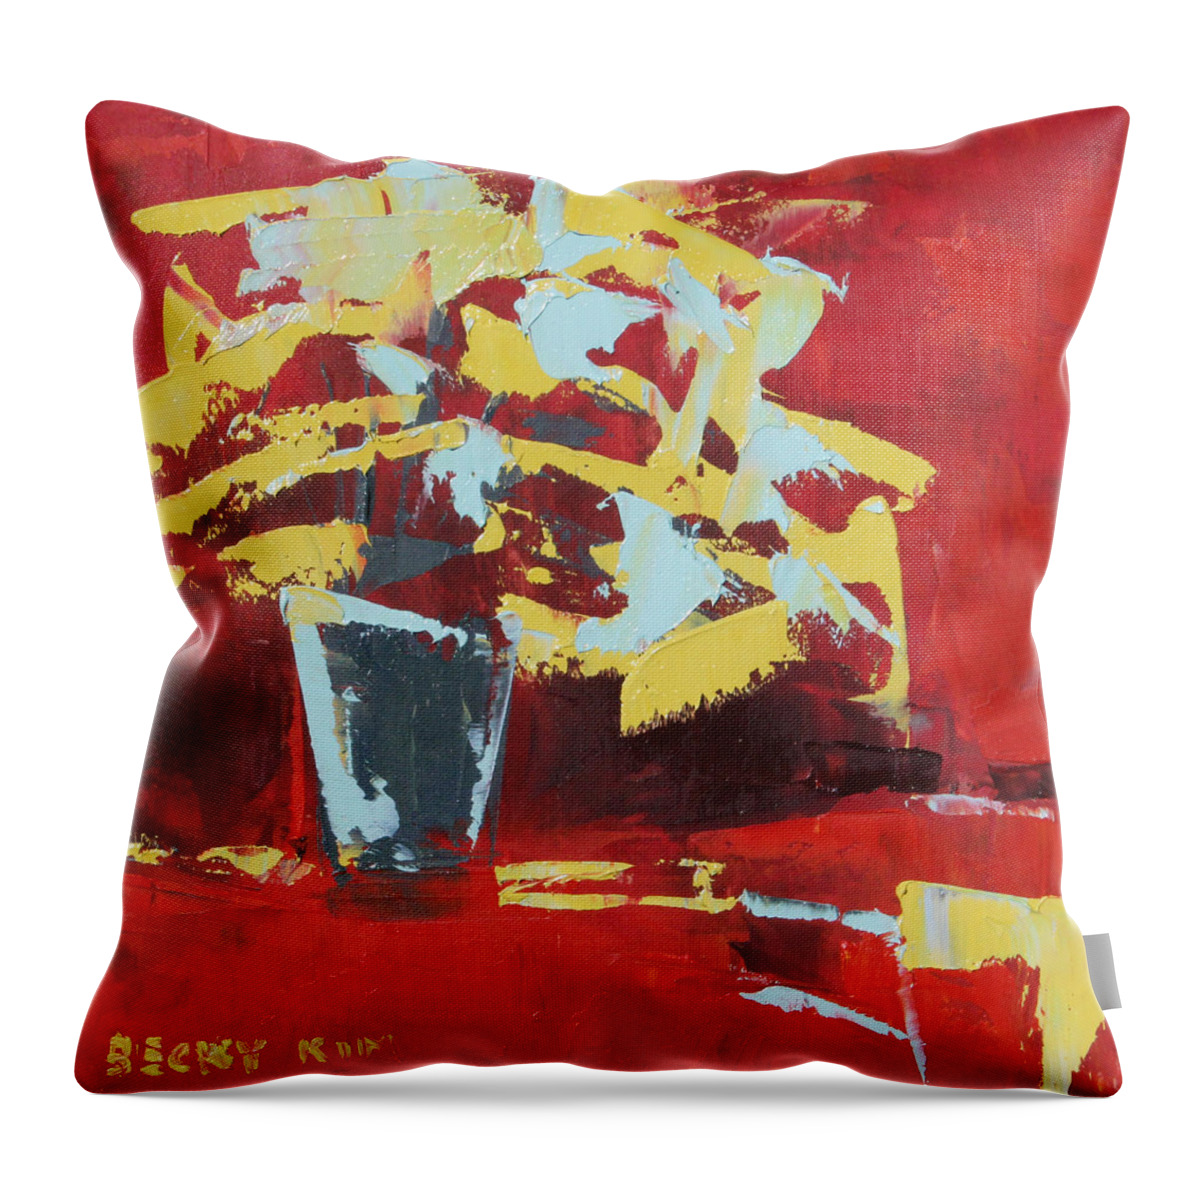 Still Life Throw Pillow featuring the painting Midnight by Becky Kim